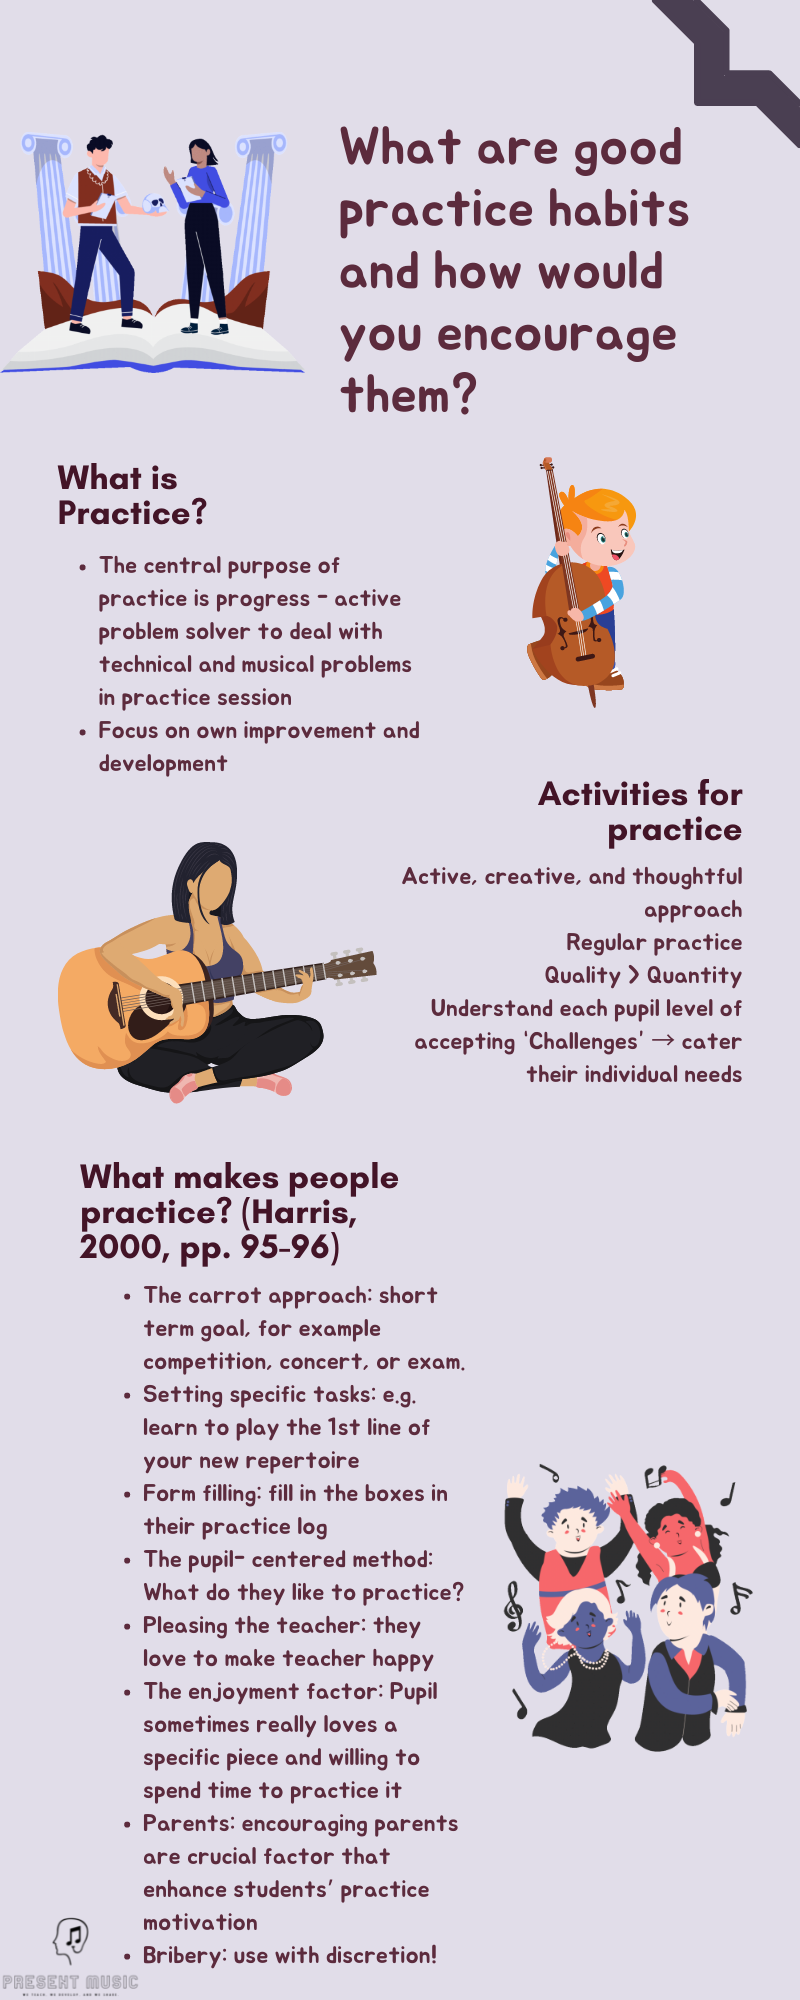 What are good practice habits and how would you encourage them?